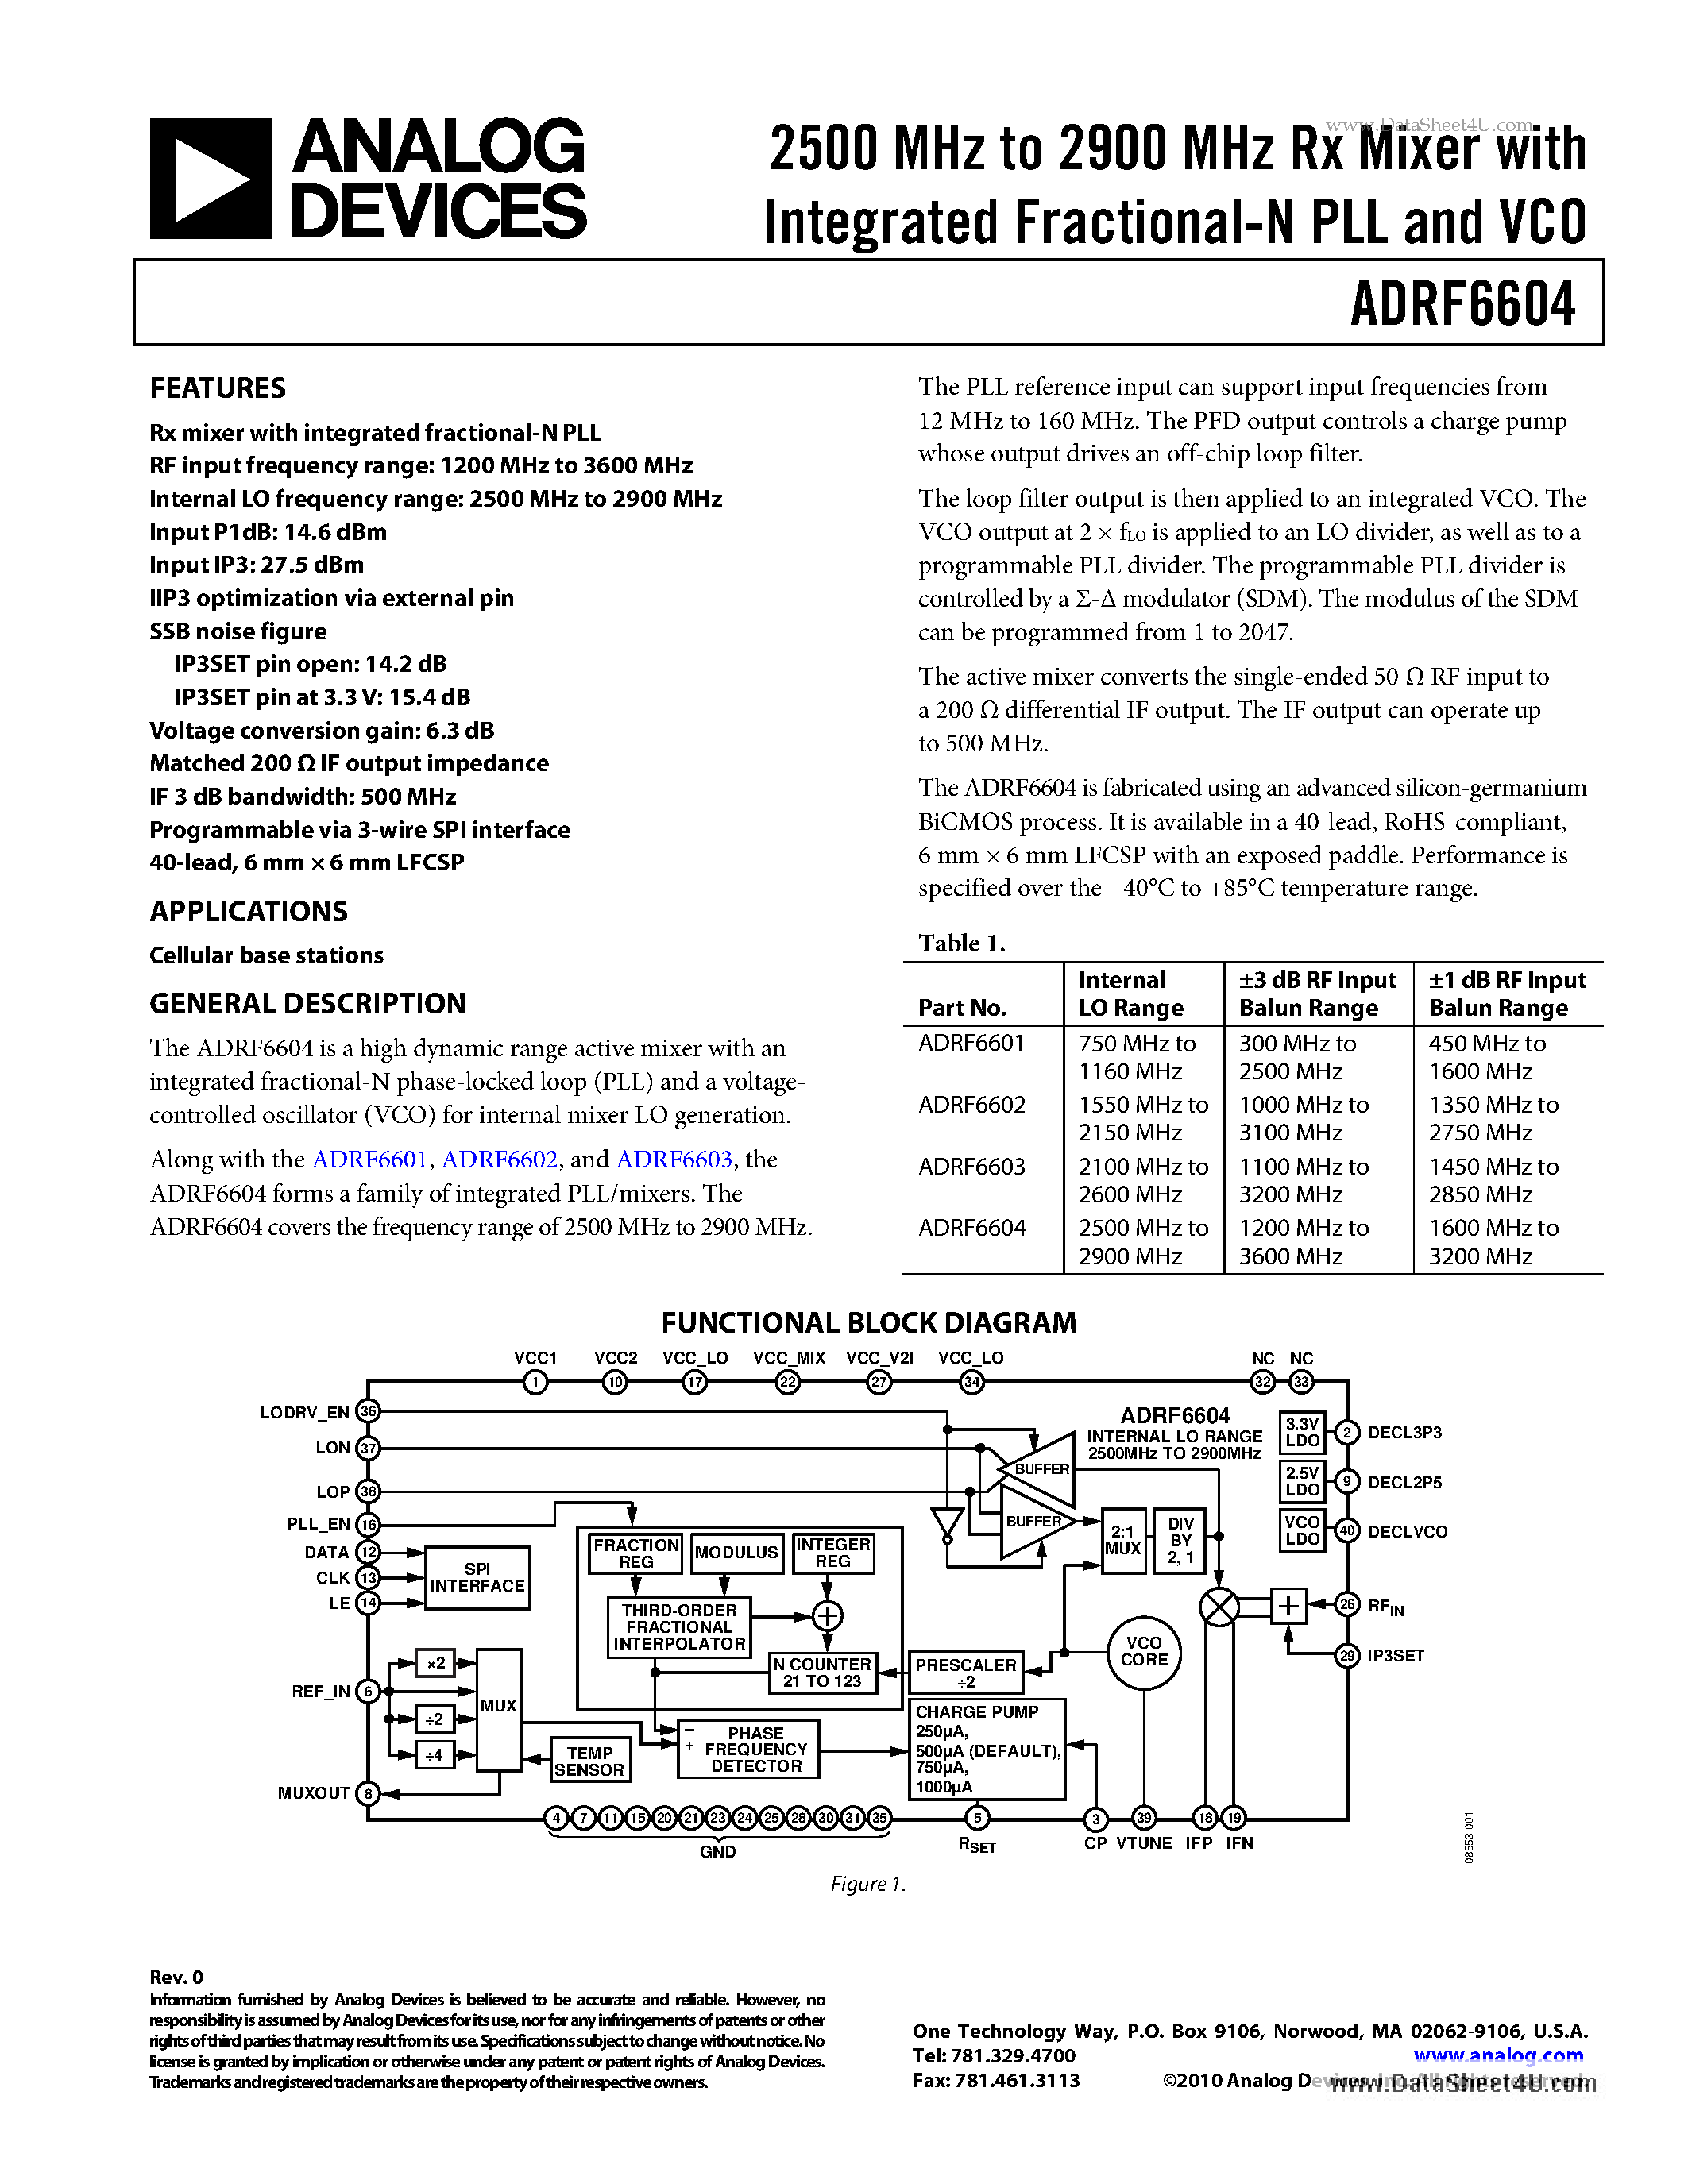 Datasheet ADRF6604 - 2500 MHz to 2900 MHz Rx Mixer page 1